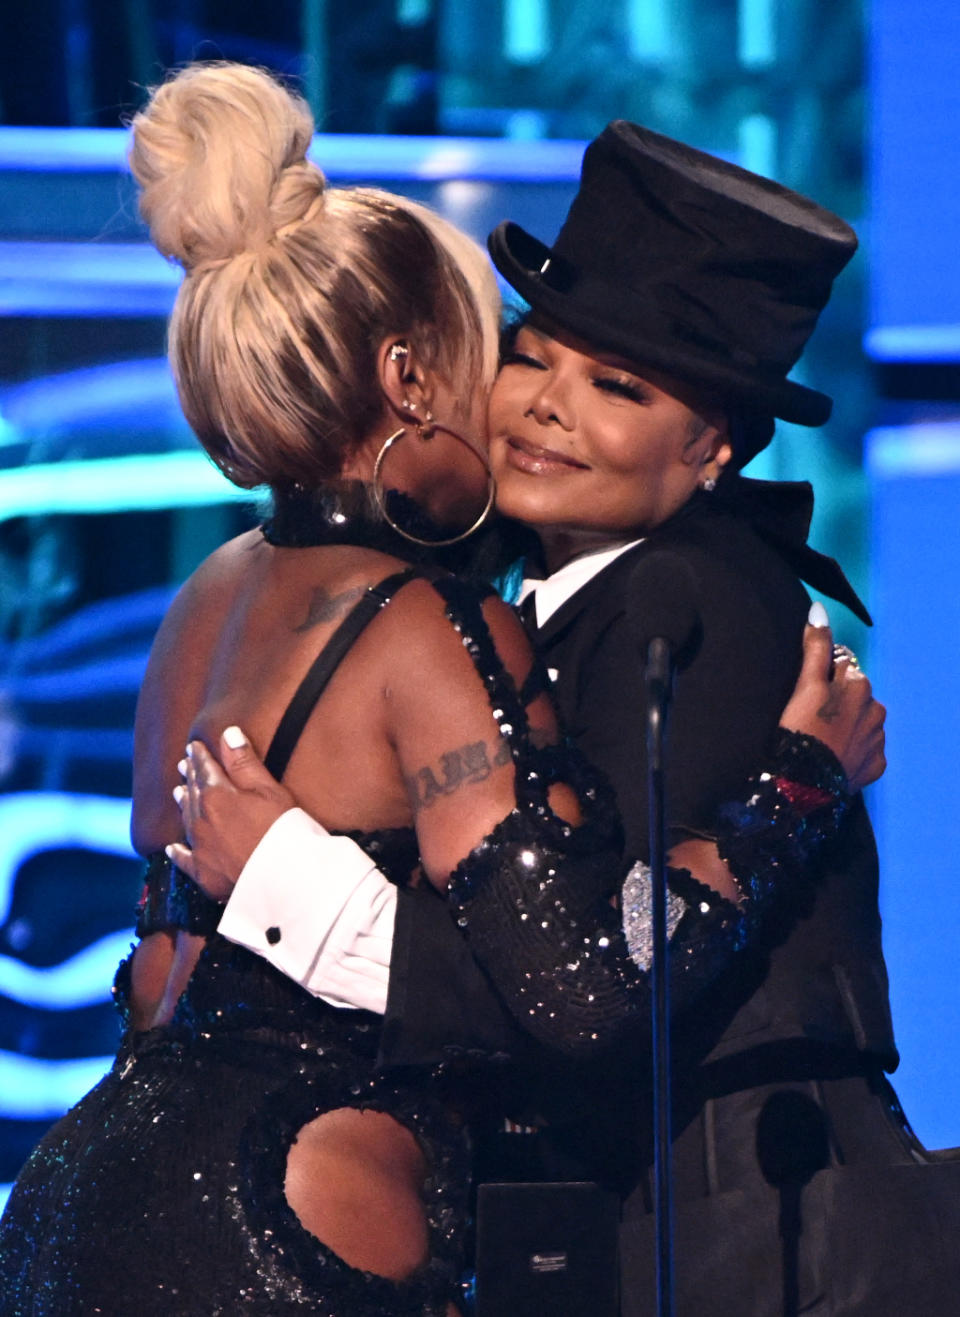 Janet Jackson and Mary J. Blige embrace one another as Jackson presents Blige with Icon Award at the 2022 Billboard Music Awards